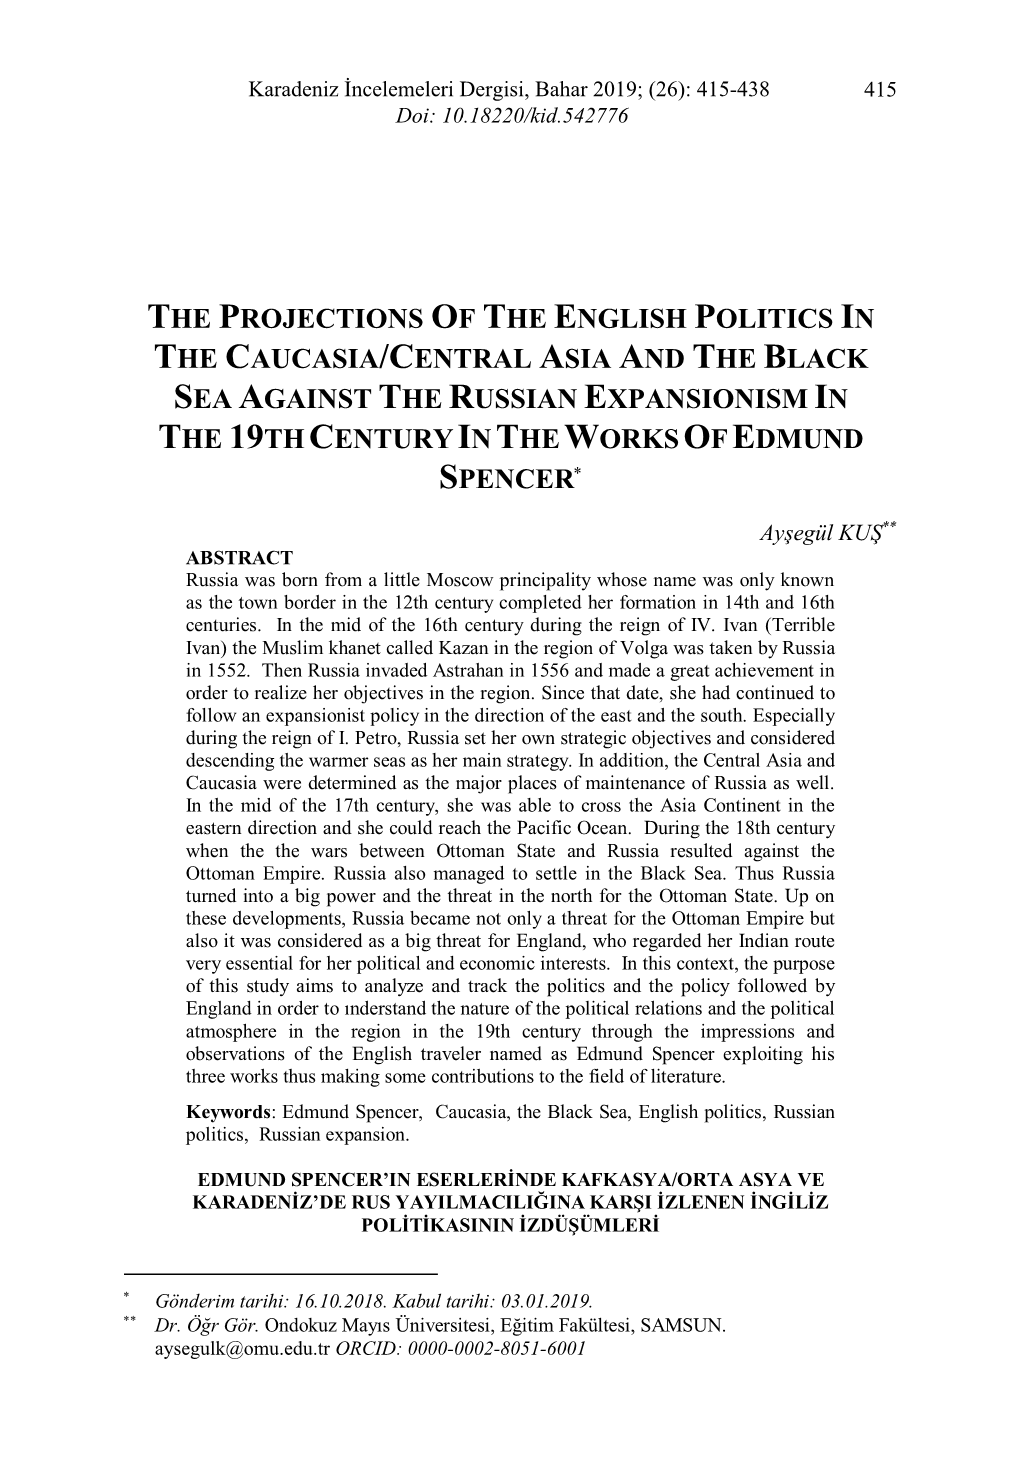 The Projections of the English Politics in the Caucasia/Central Asia and the Black Sea Against the Russian Expansionism in the 1